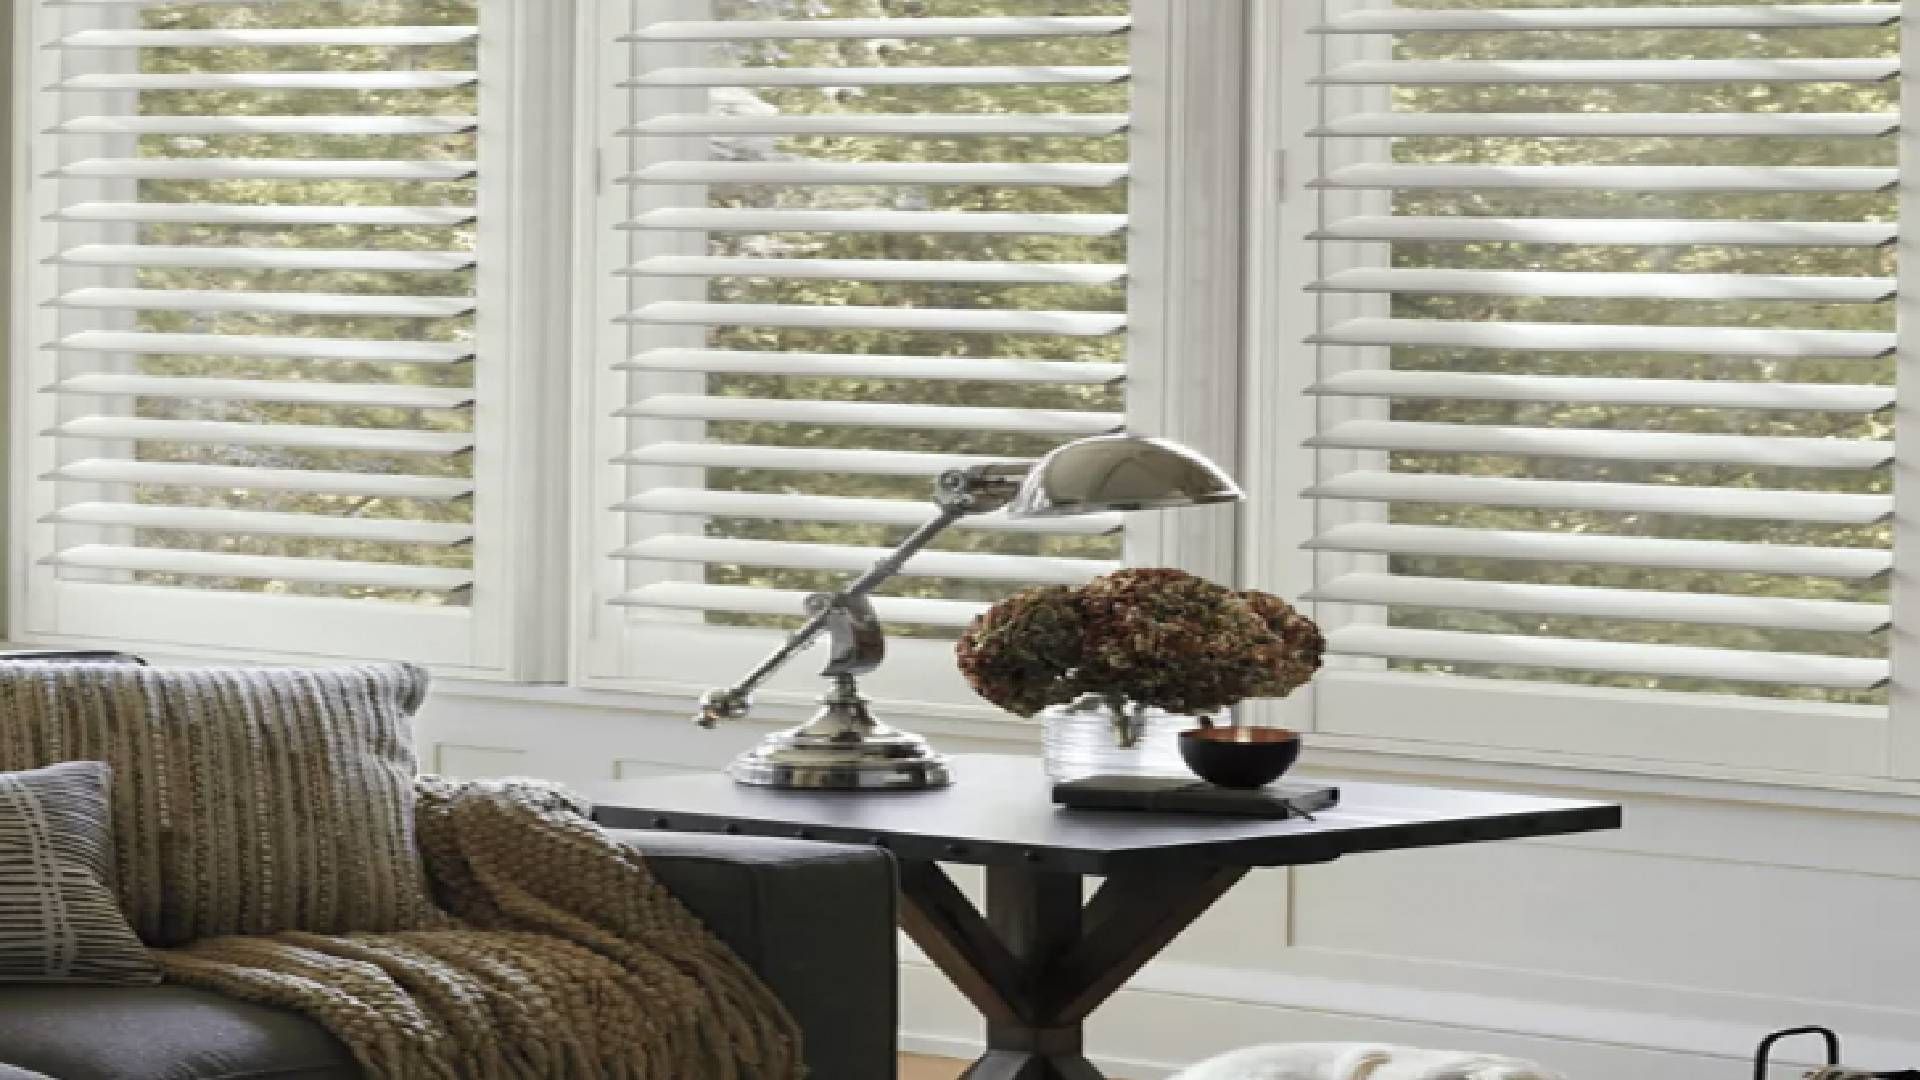 A table and sofa in a living room with large windows covered by NewStyle® Composite Shutters